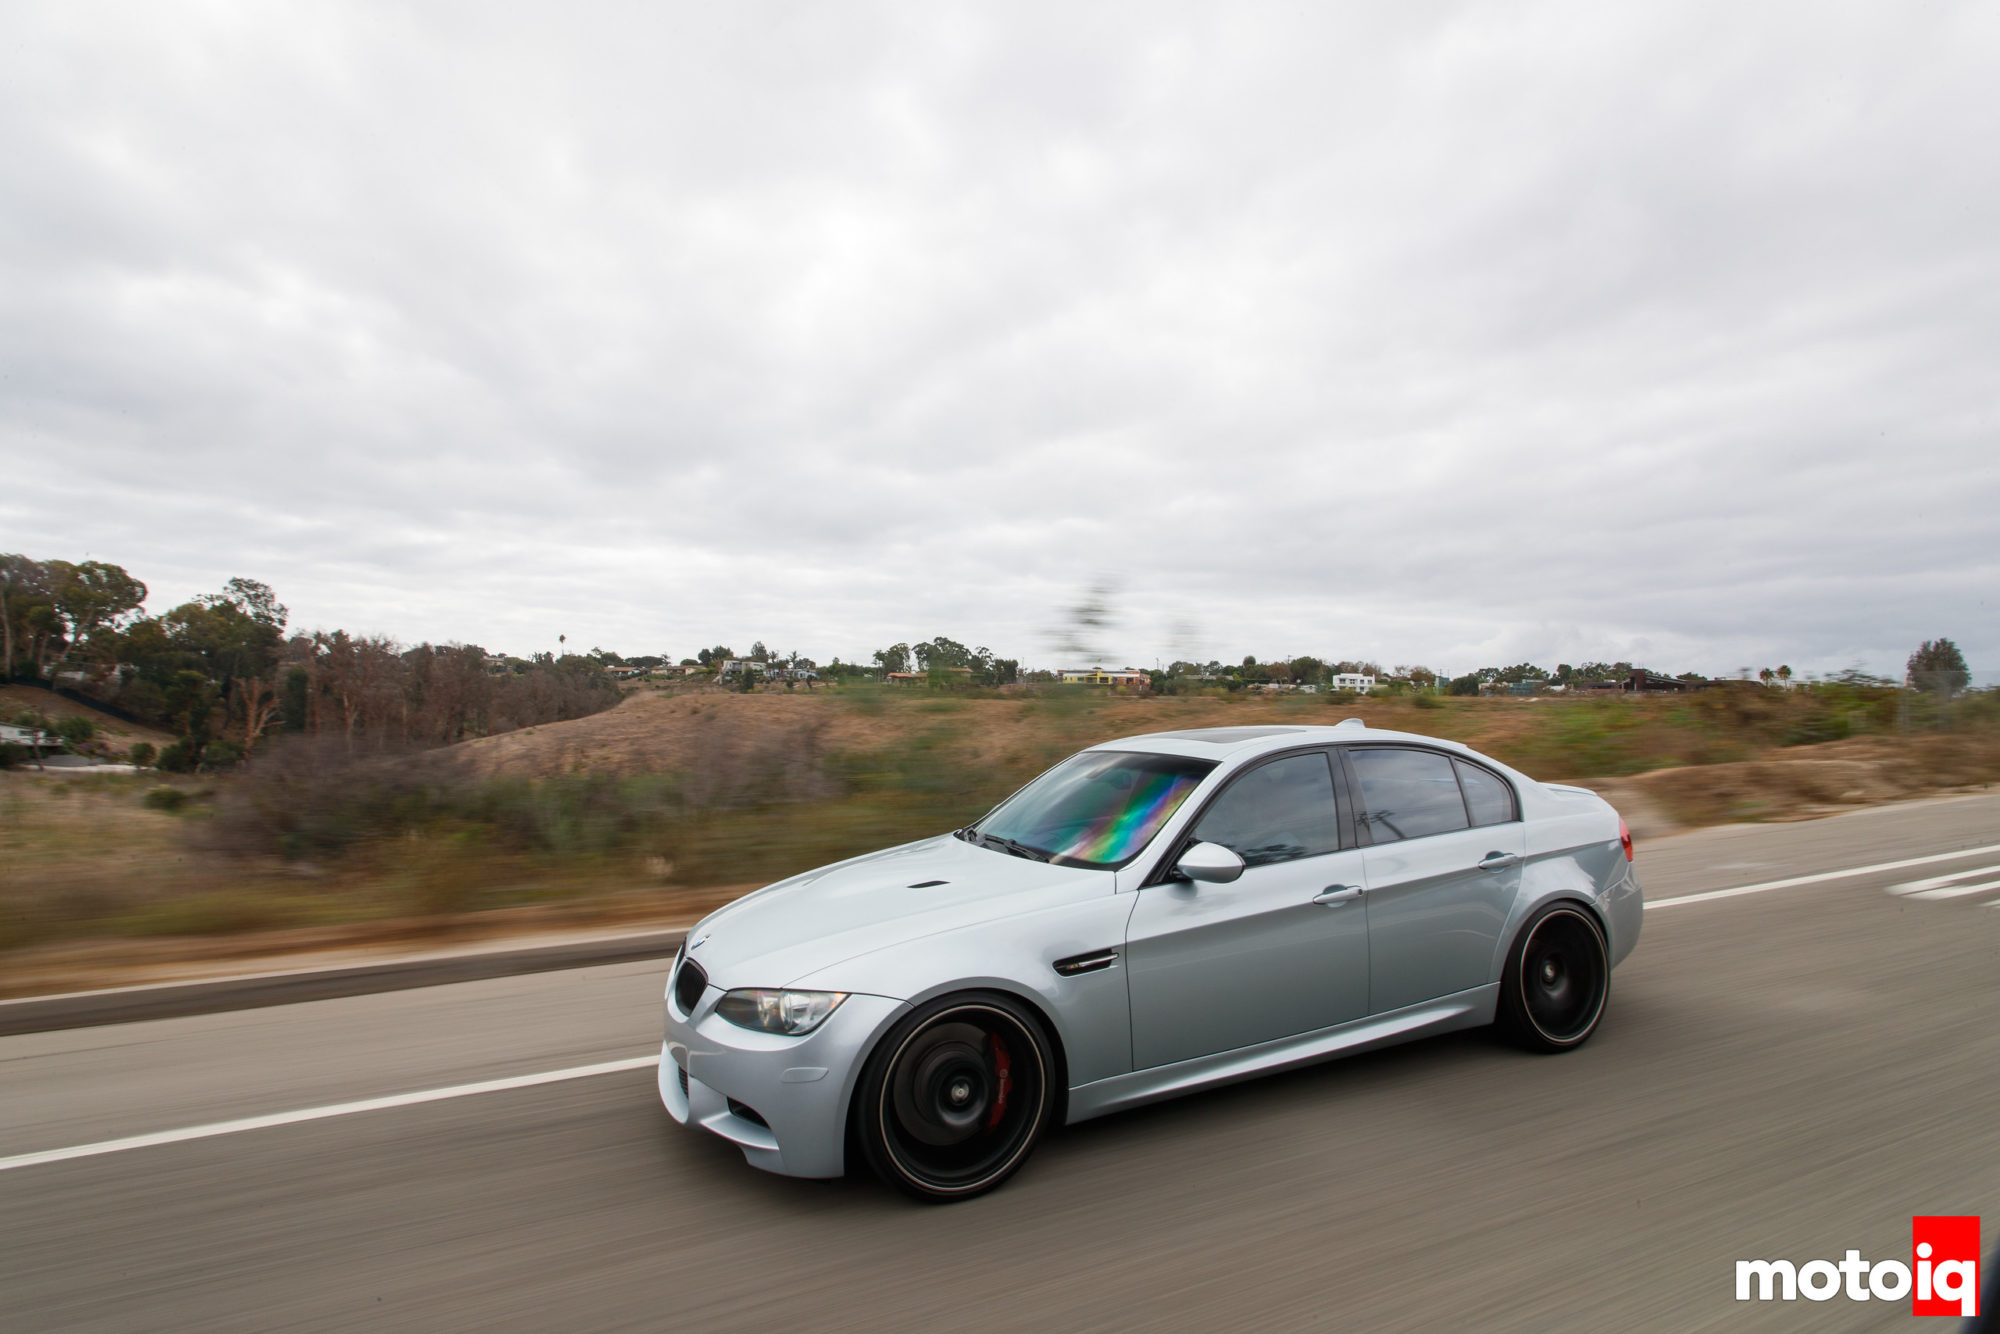 ST Suspension's 3-Way Adjustable XTA Plus 3 Coilovers for the E92